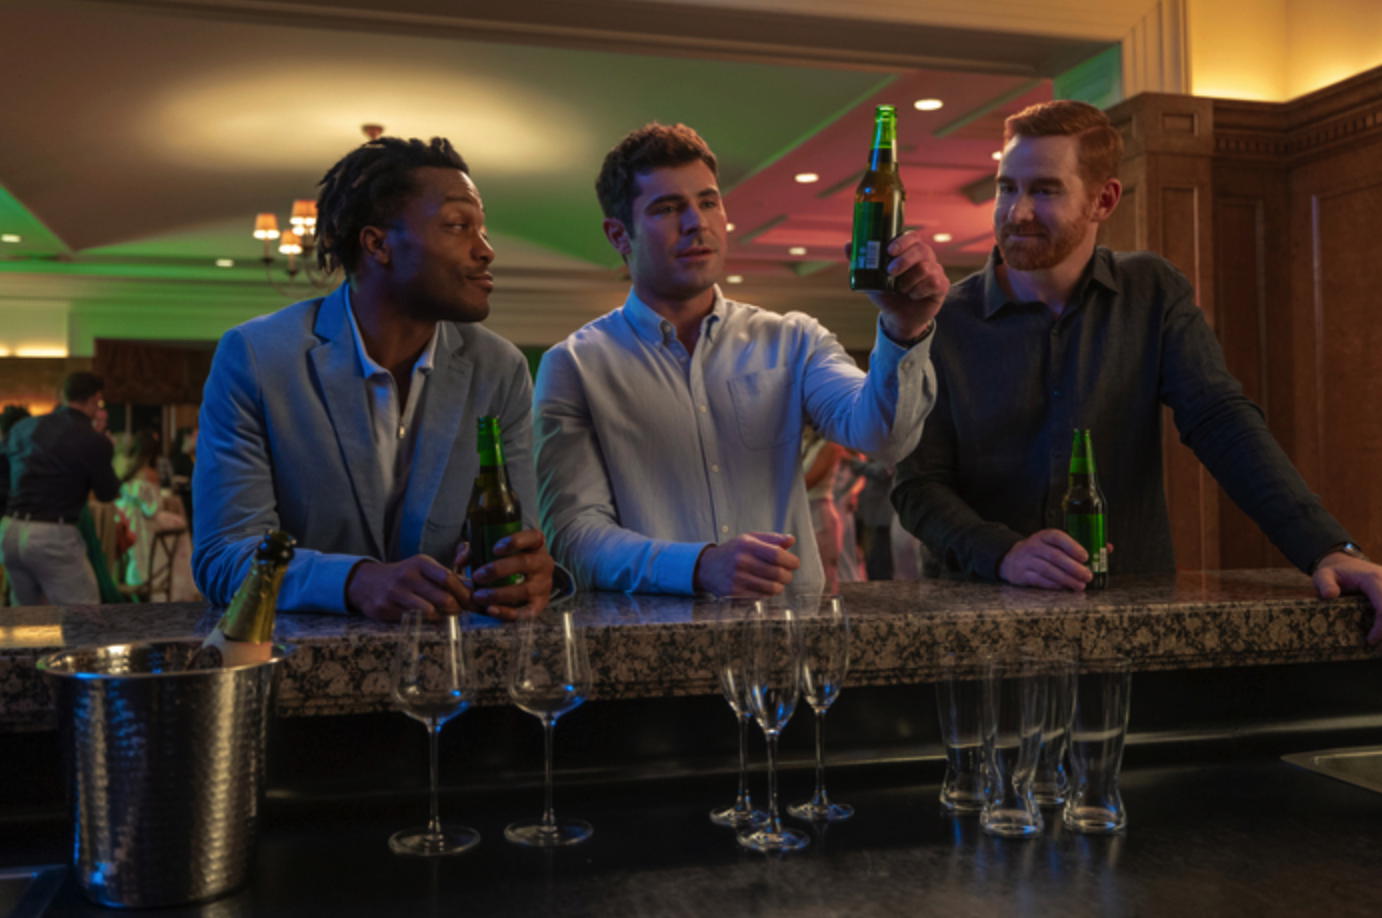 Jermaine Fowler as Wes, Zac Efron as Dean and Andrew Santino as JT star in RICKY STANICKY. (Photo Credit: Ben King/Prime)